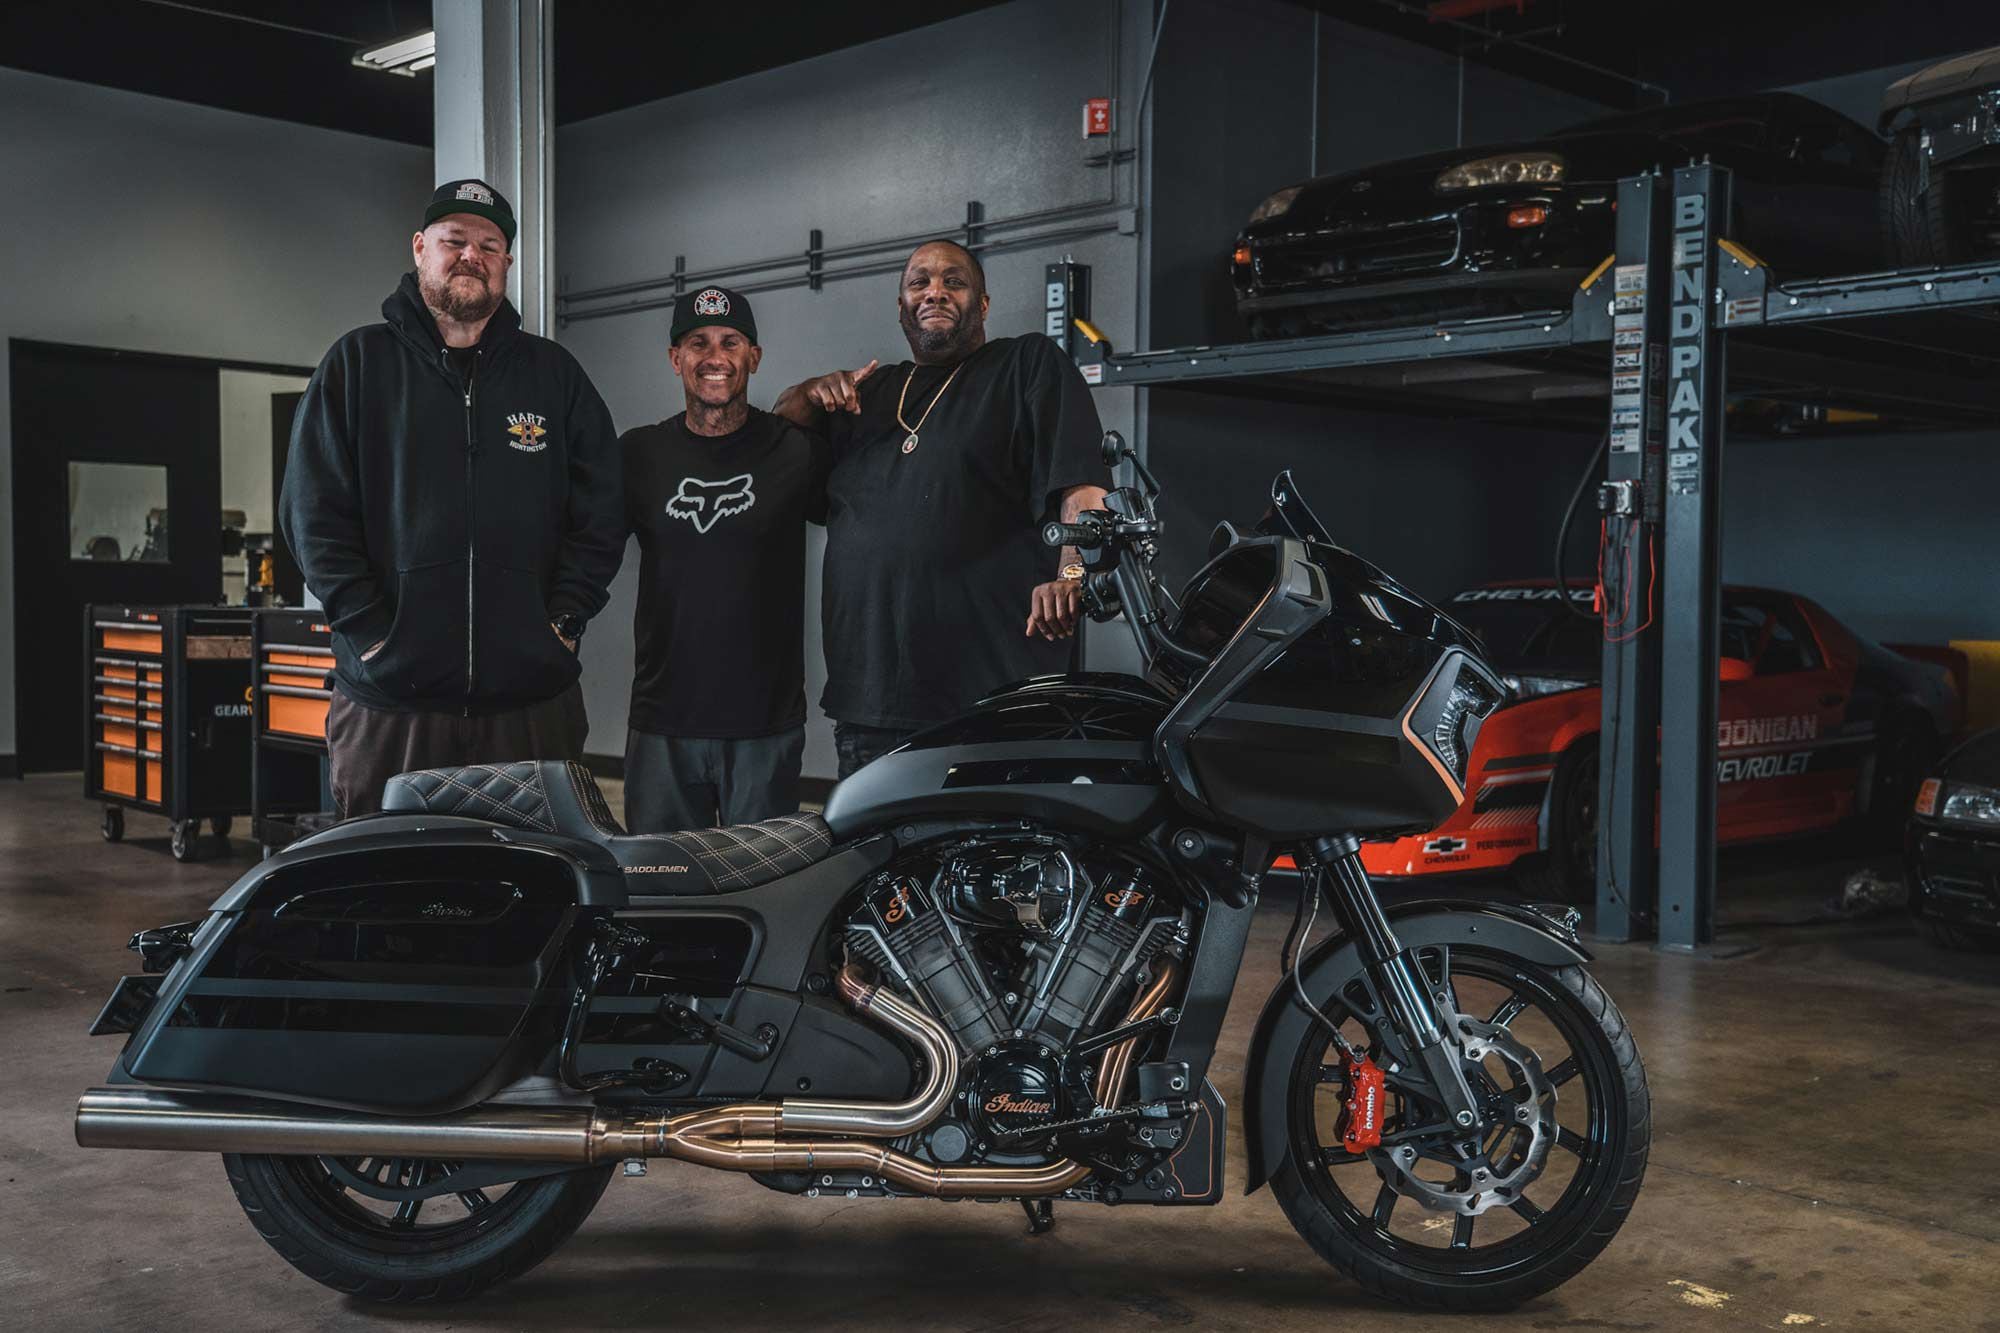 From left to right, Big B, Carey Hart, and Killer Mike pose with the custom-built Challenger.